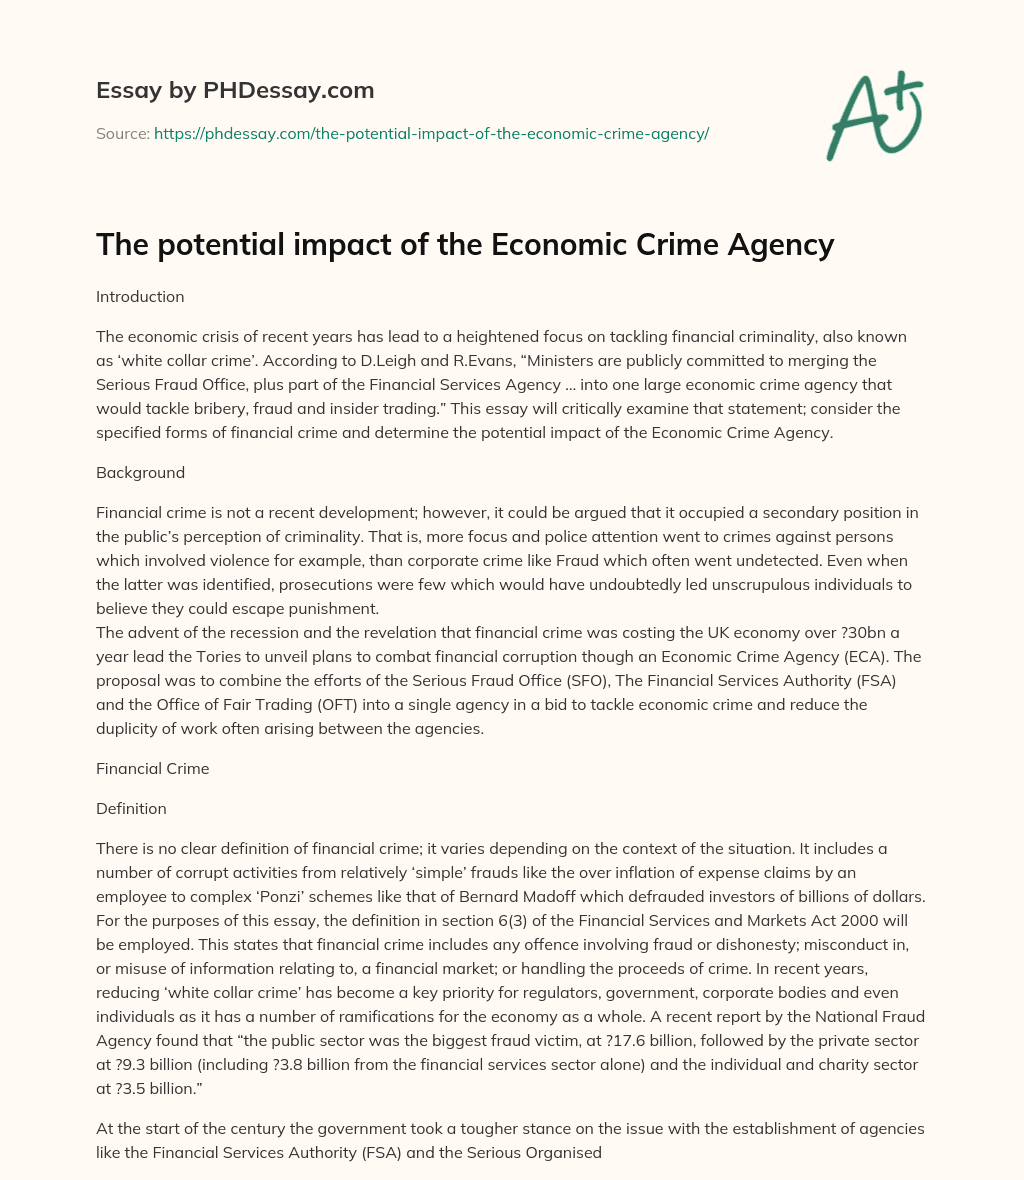 The potential impact of the Economic Crime Agency essay